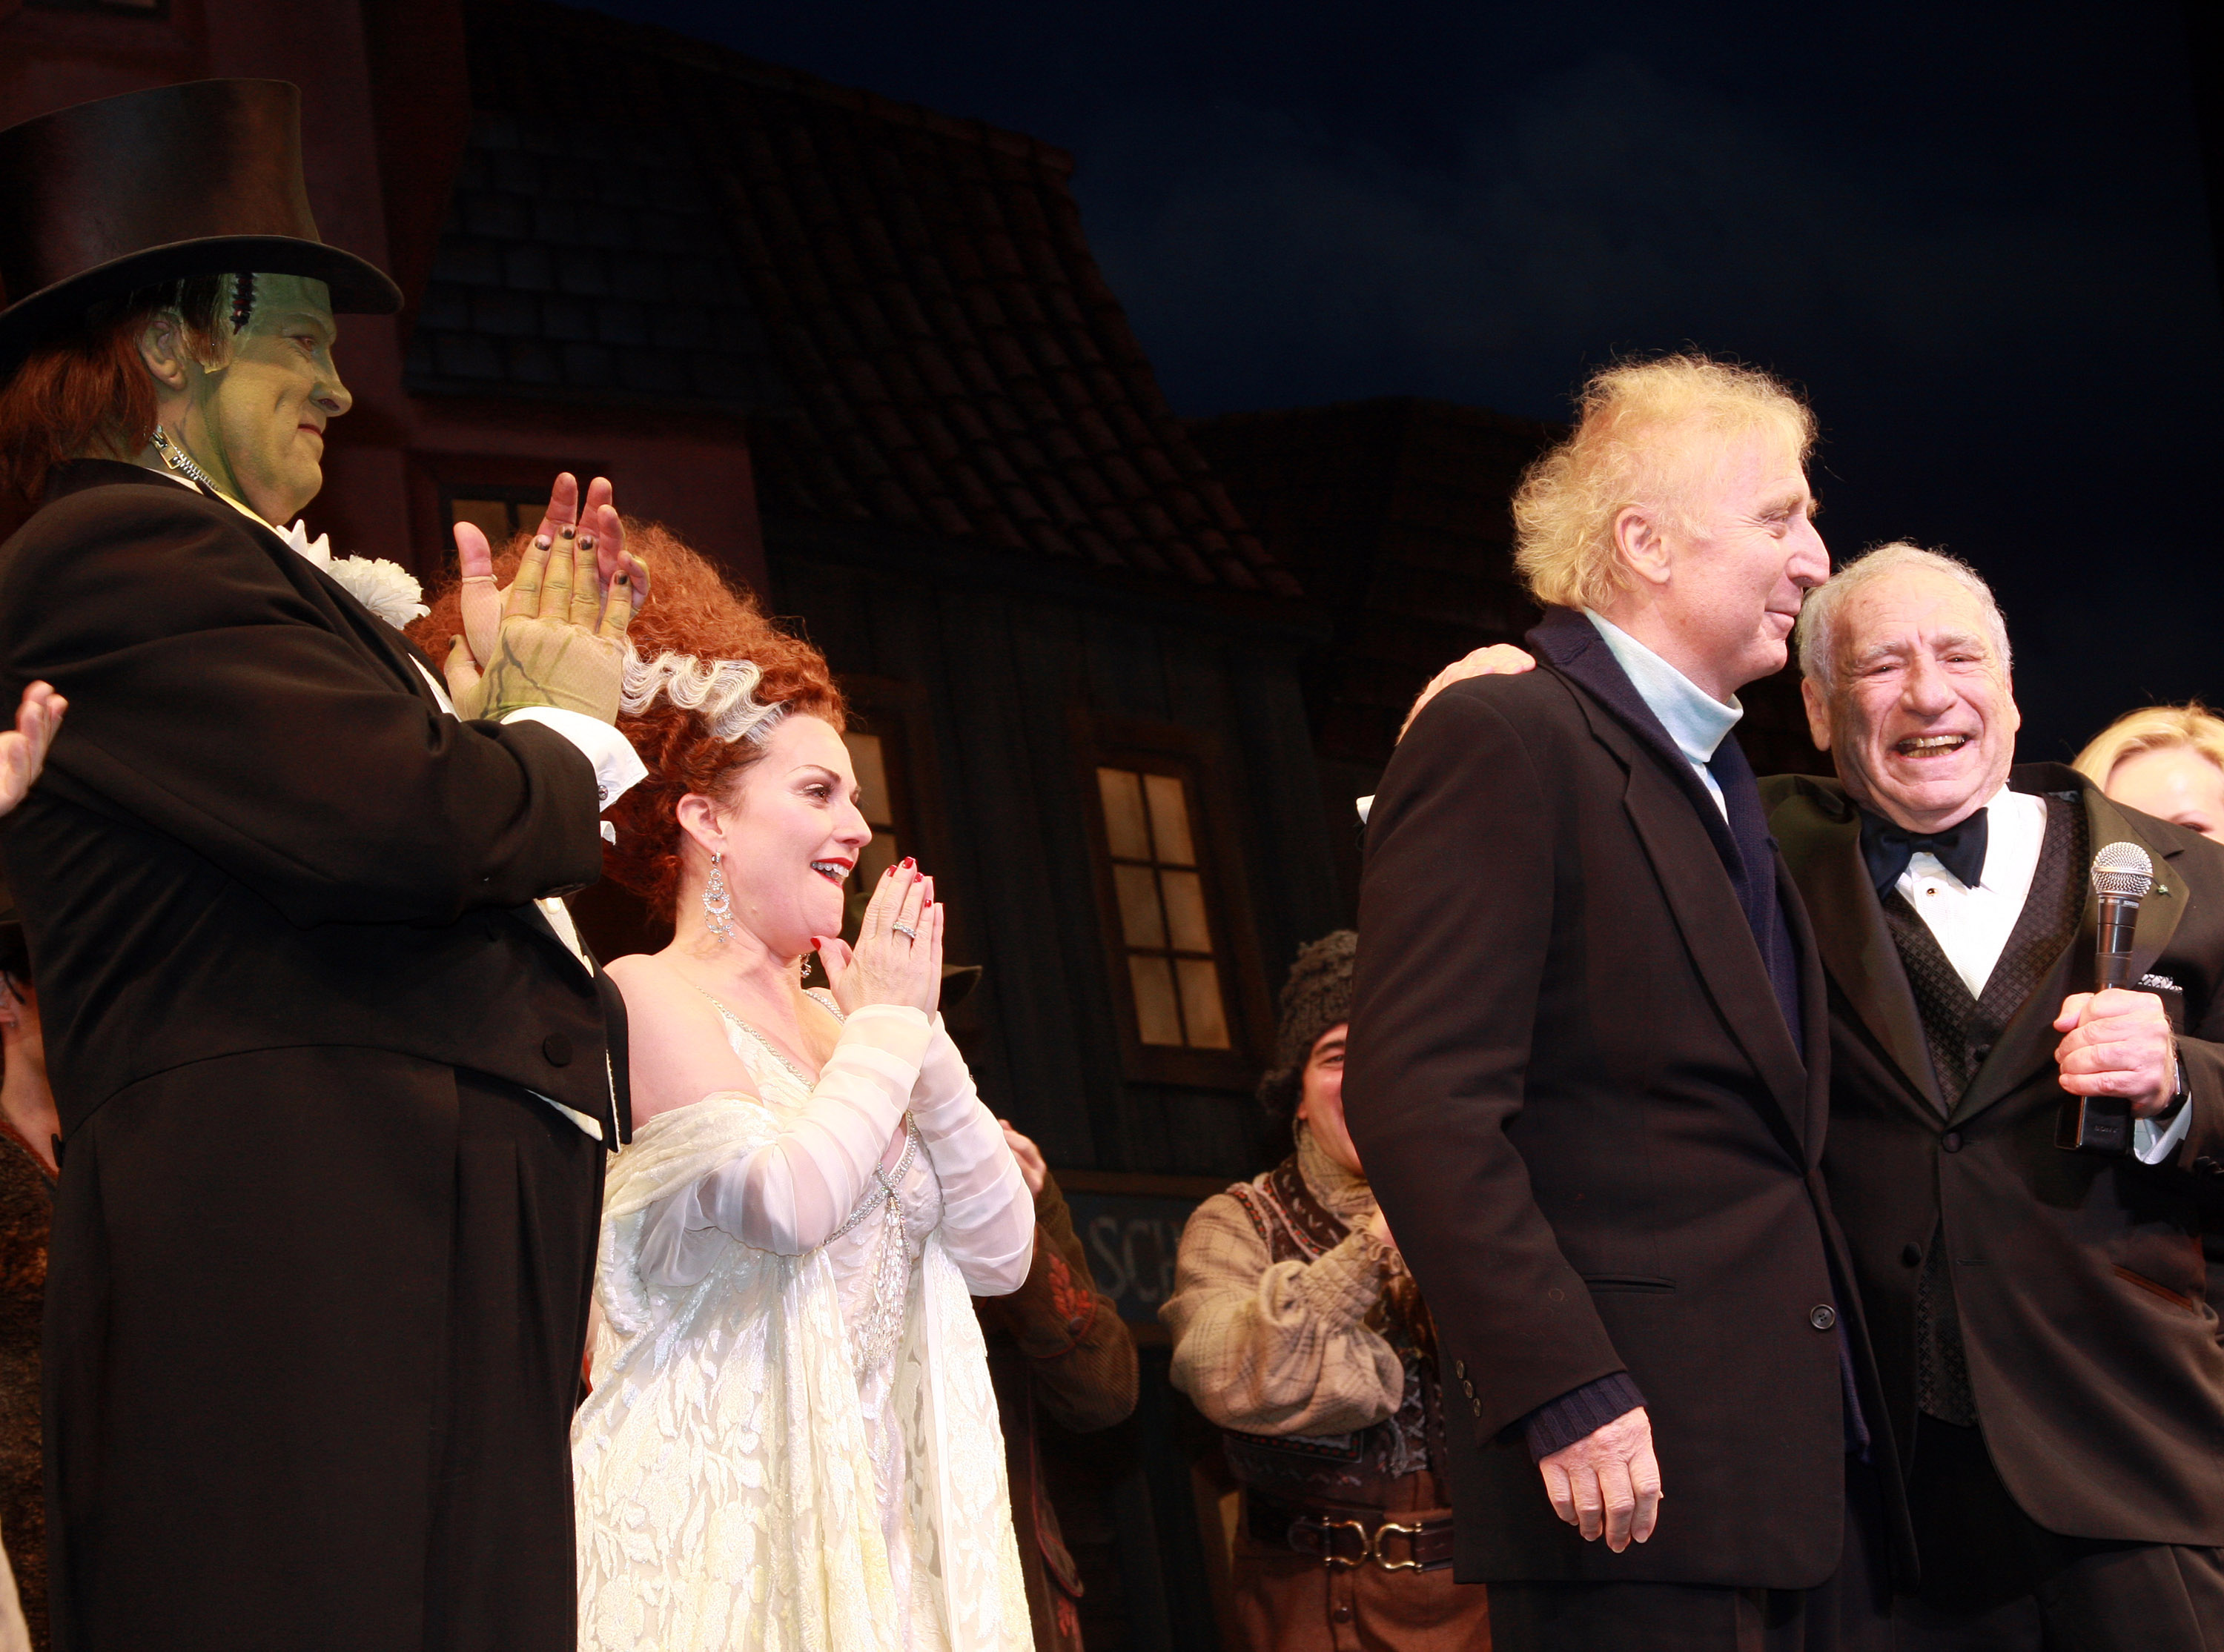 Gene Wilder and Mel Brooks, far right, at the curtain call for Mel Brooks' musical, <i>Young Frankenstein</i>, on Nov. 8, 2007 in New York City. (Bruce Glikas—Getty Images)